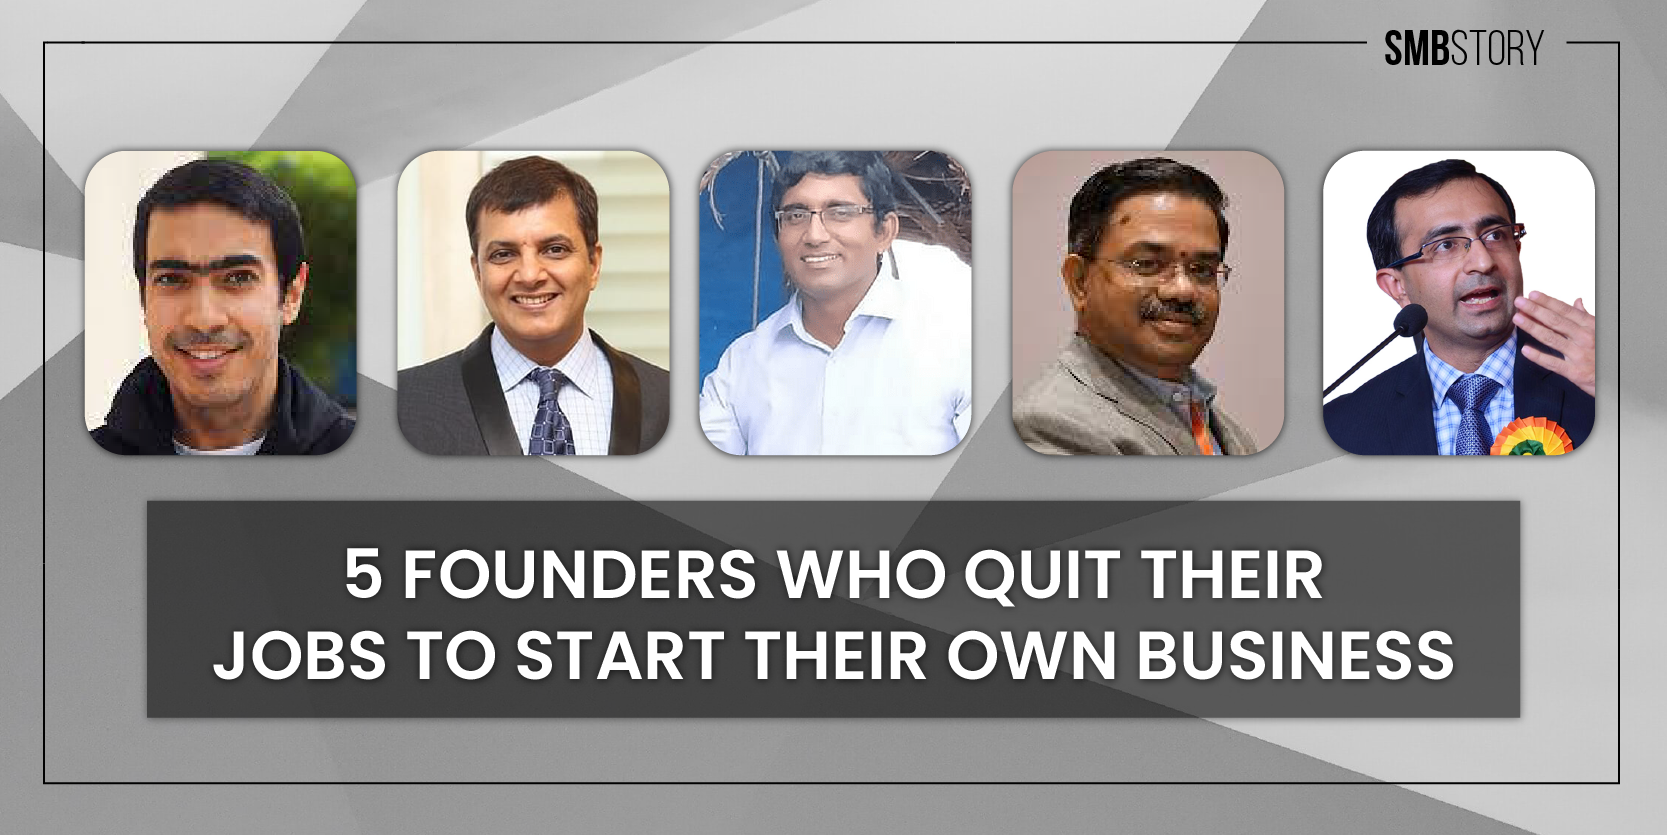 Meet these 5 entrepreneurs who quit their corporate jobs and built successful businesses